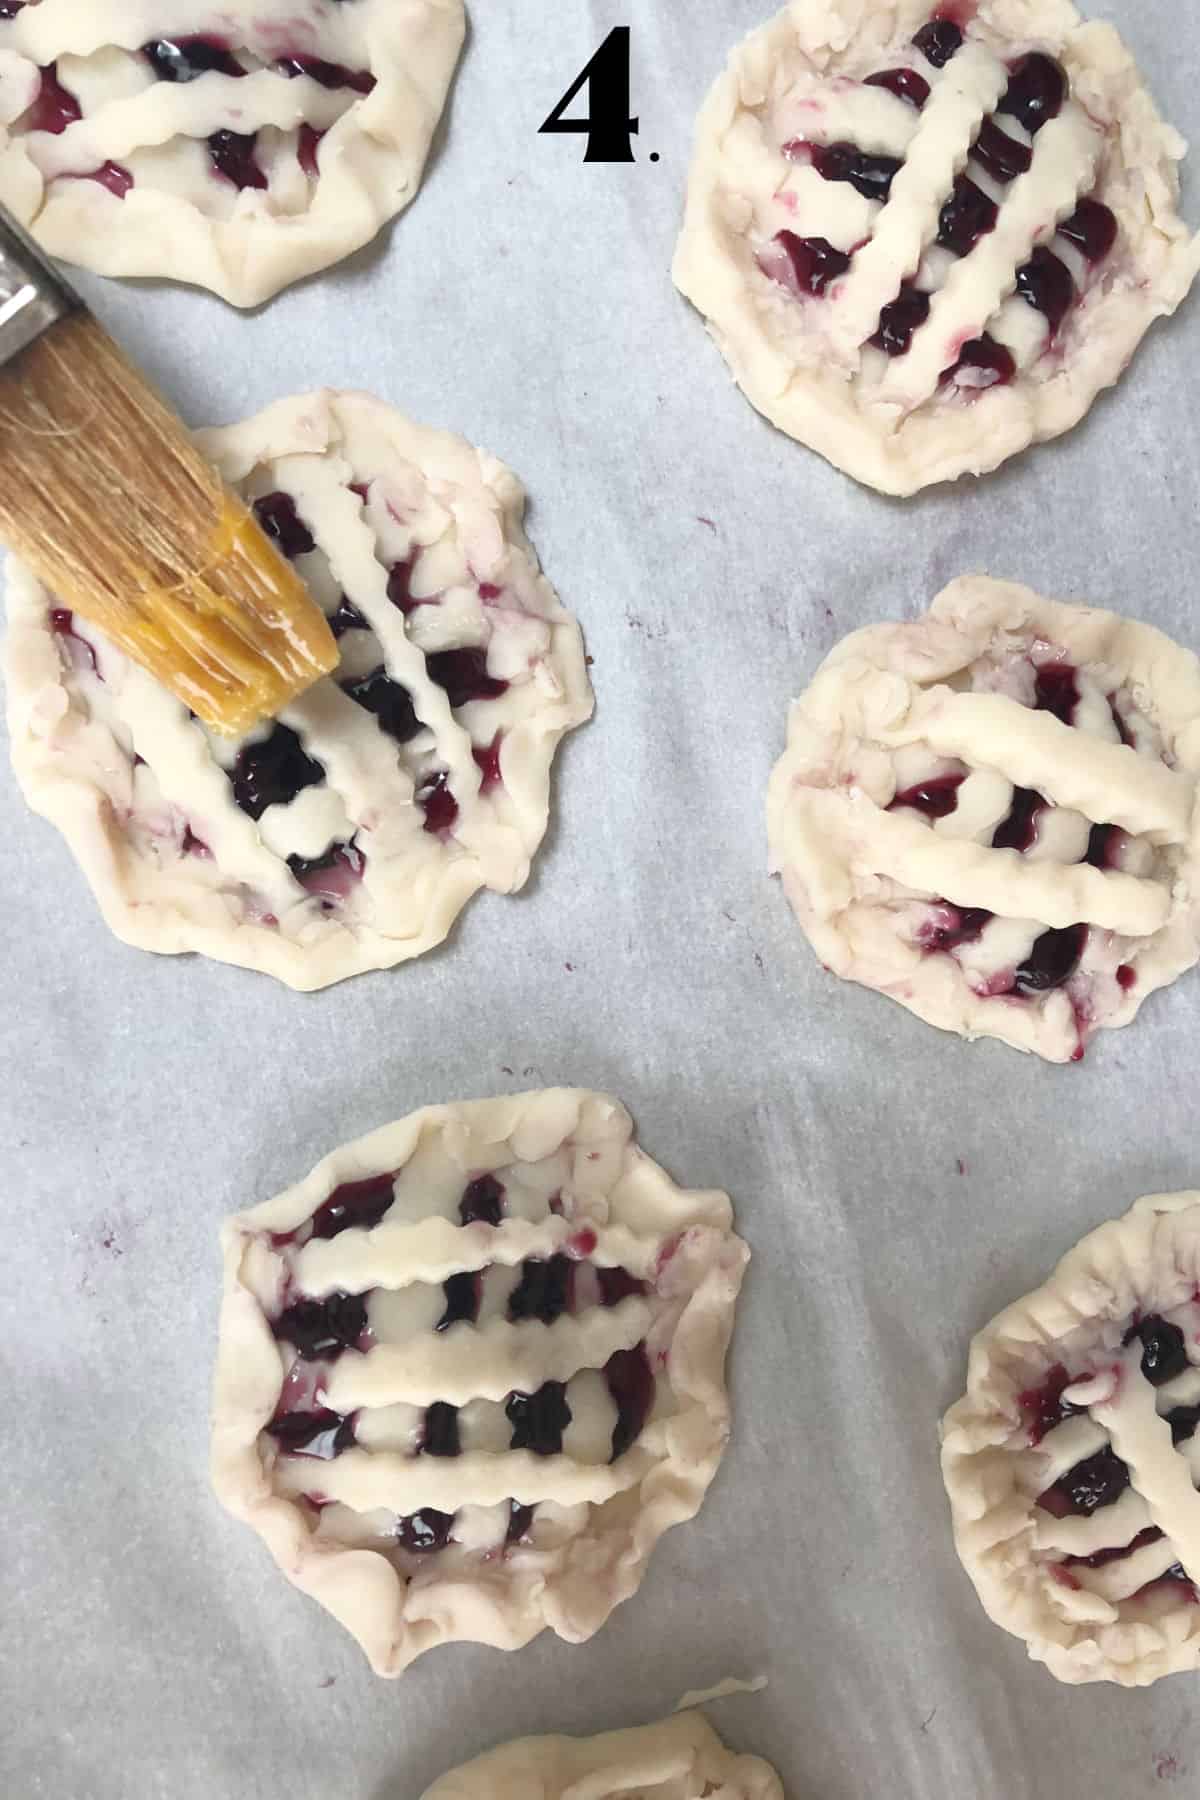 How to Make Blueberry Hand Pies Step 4 - brushing pies with egg wash.